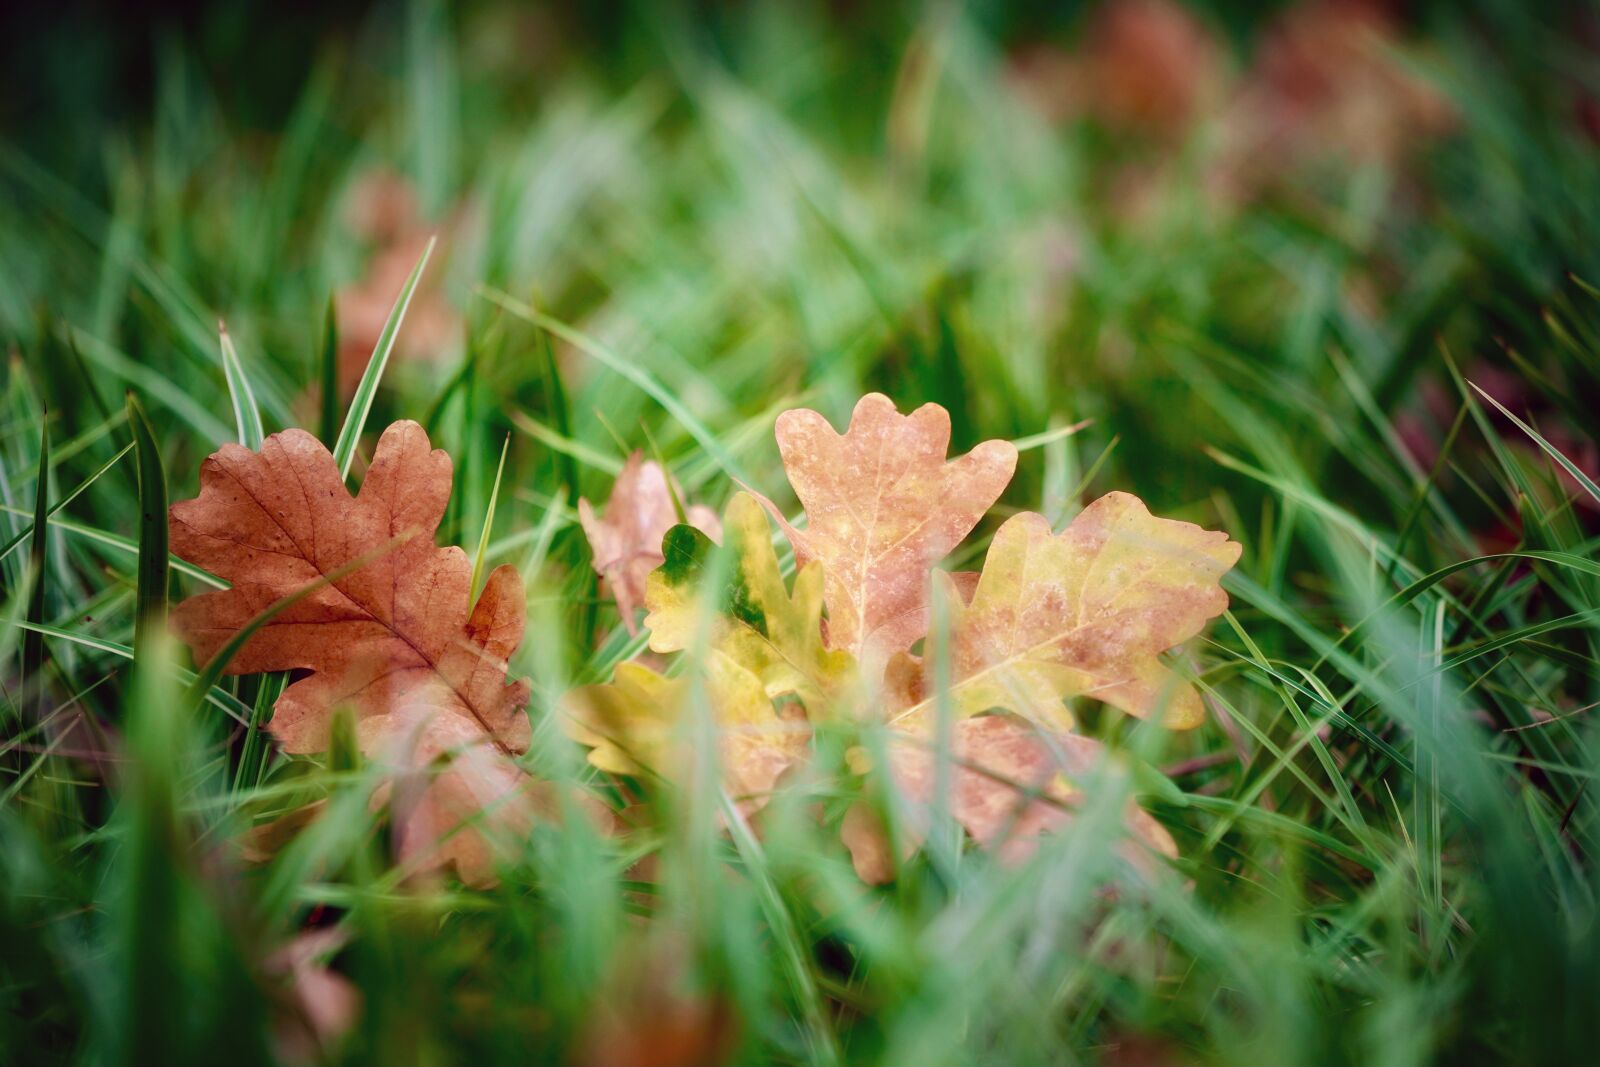 Sony a7 III sample photo. Leaves, grass, nature photography